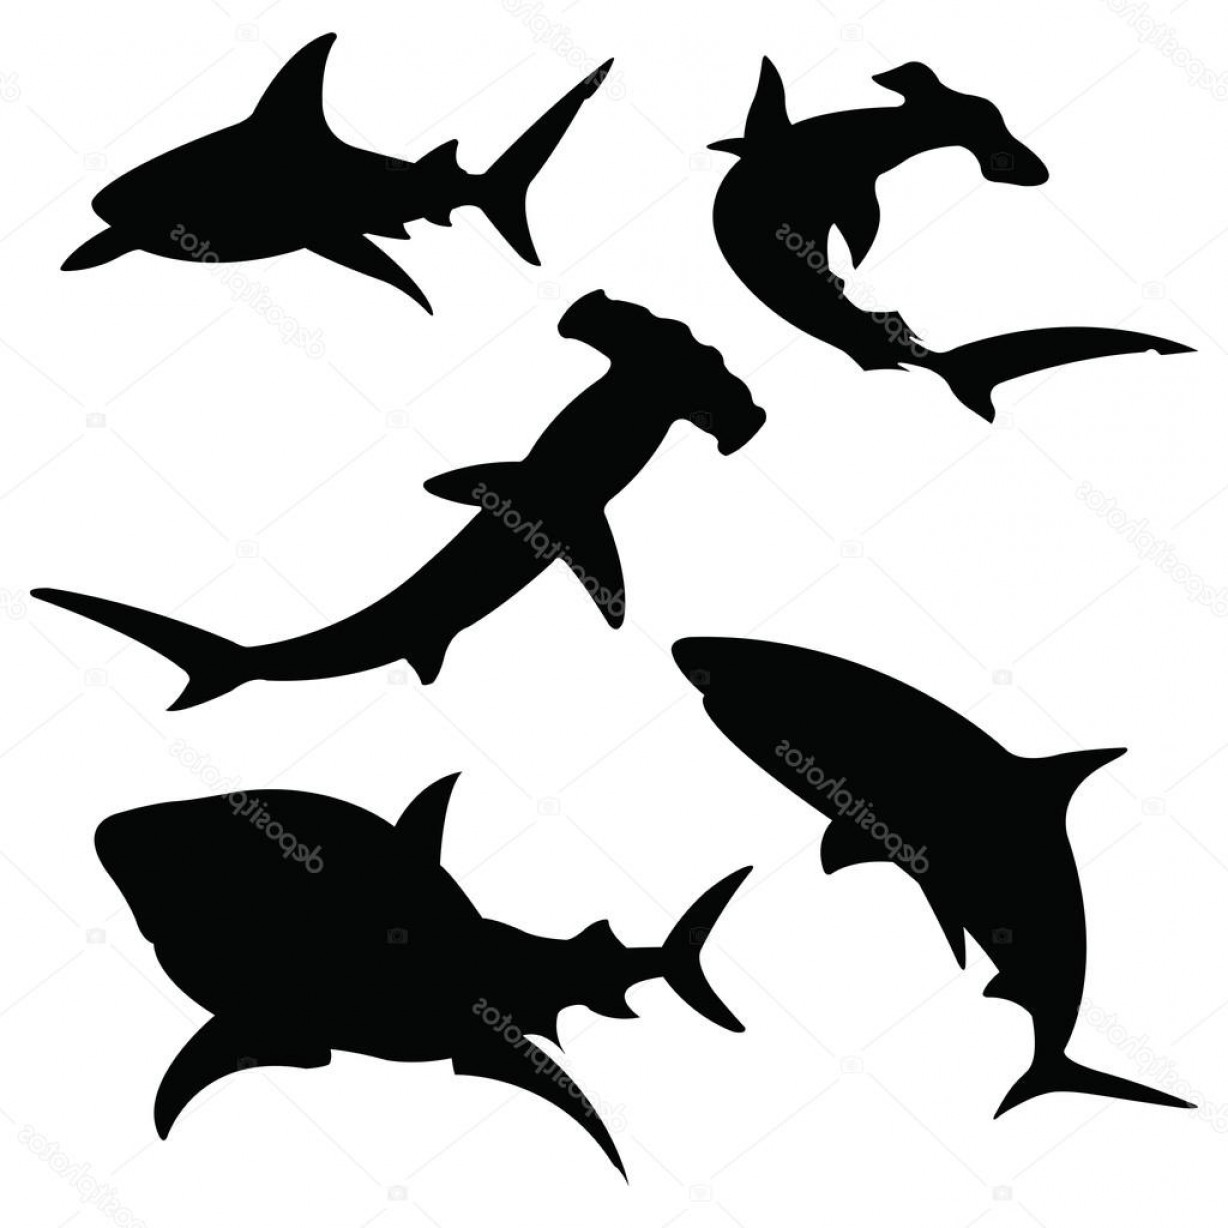 Download Shark Silhouette Vector at Vectorified.com | Collection of ...